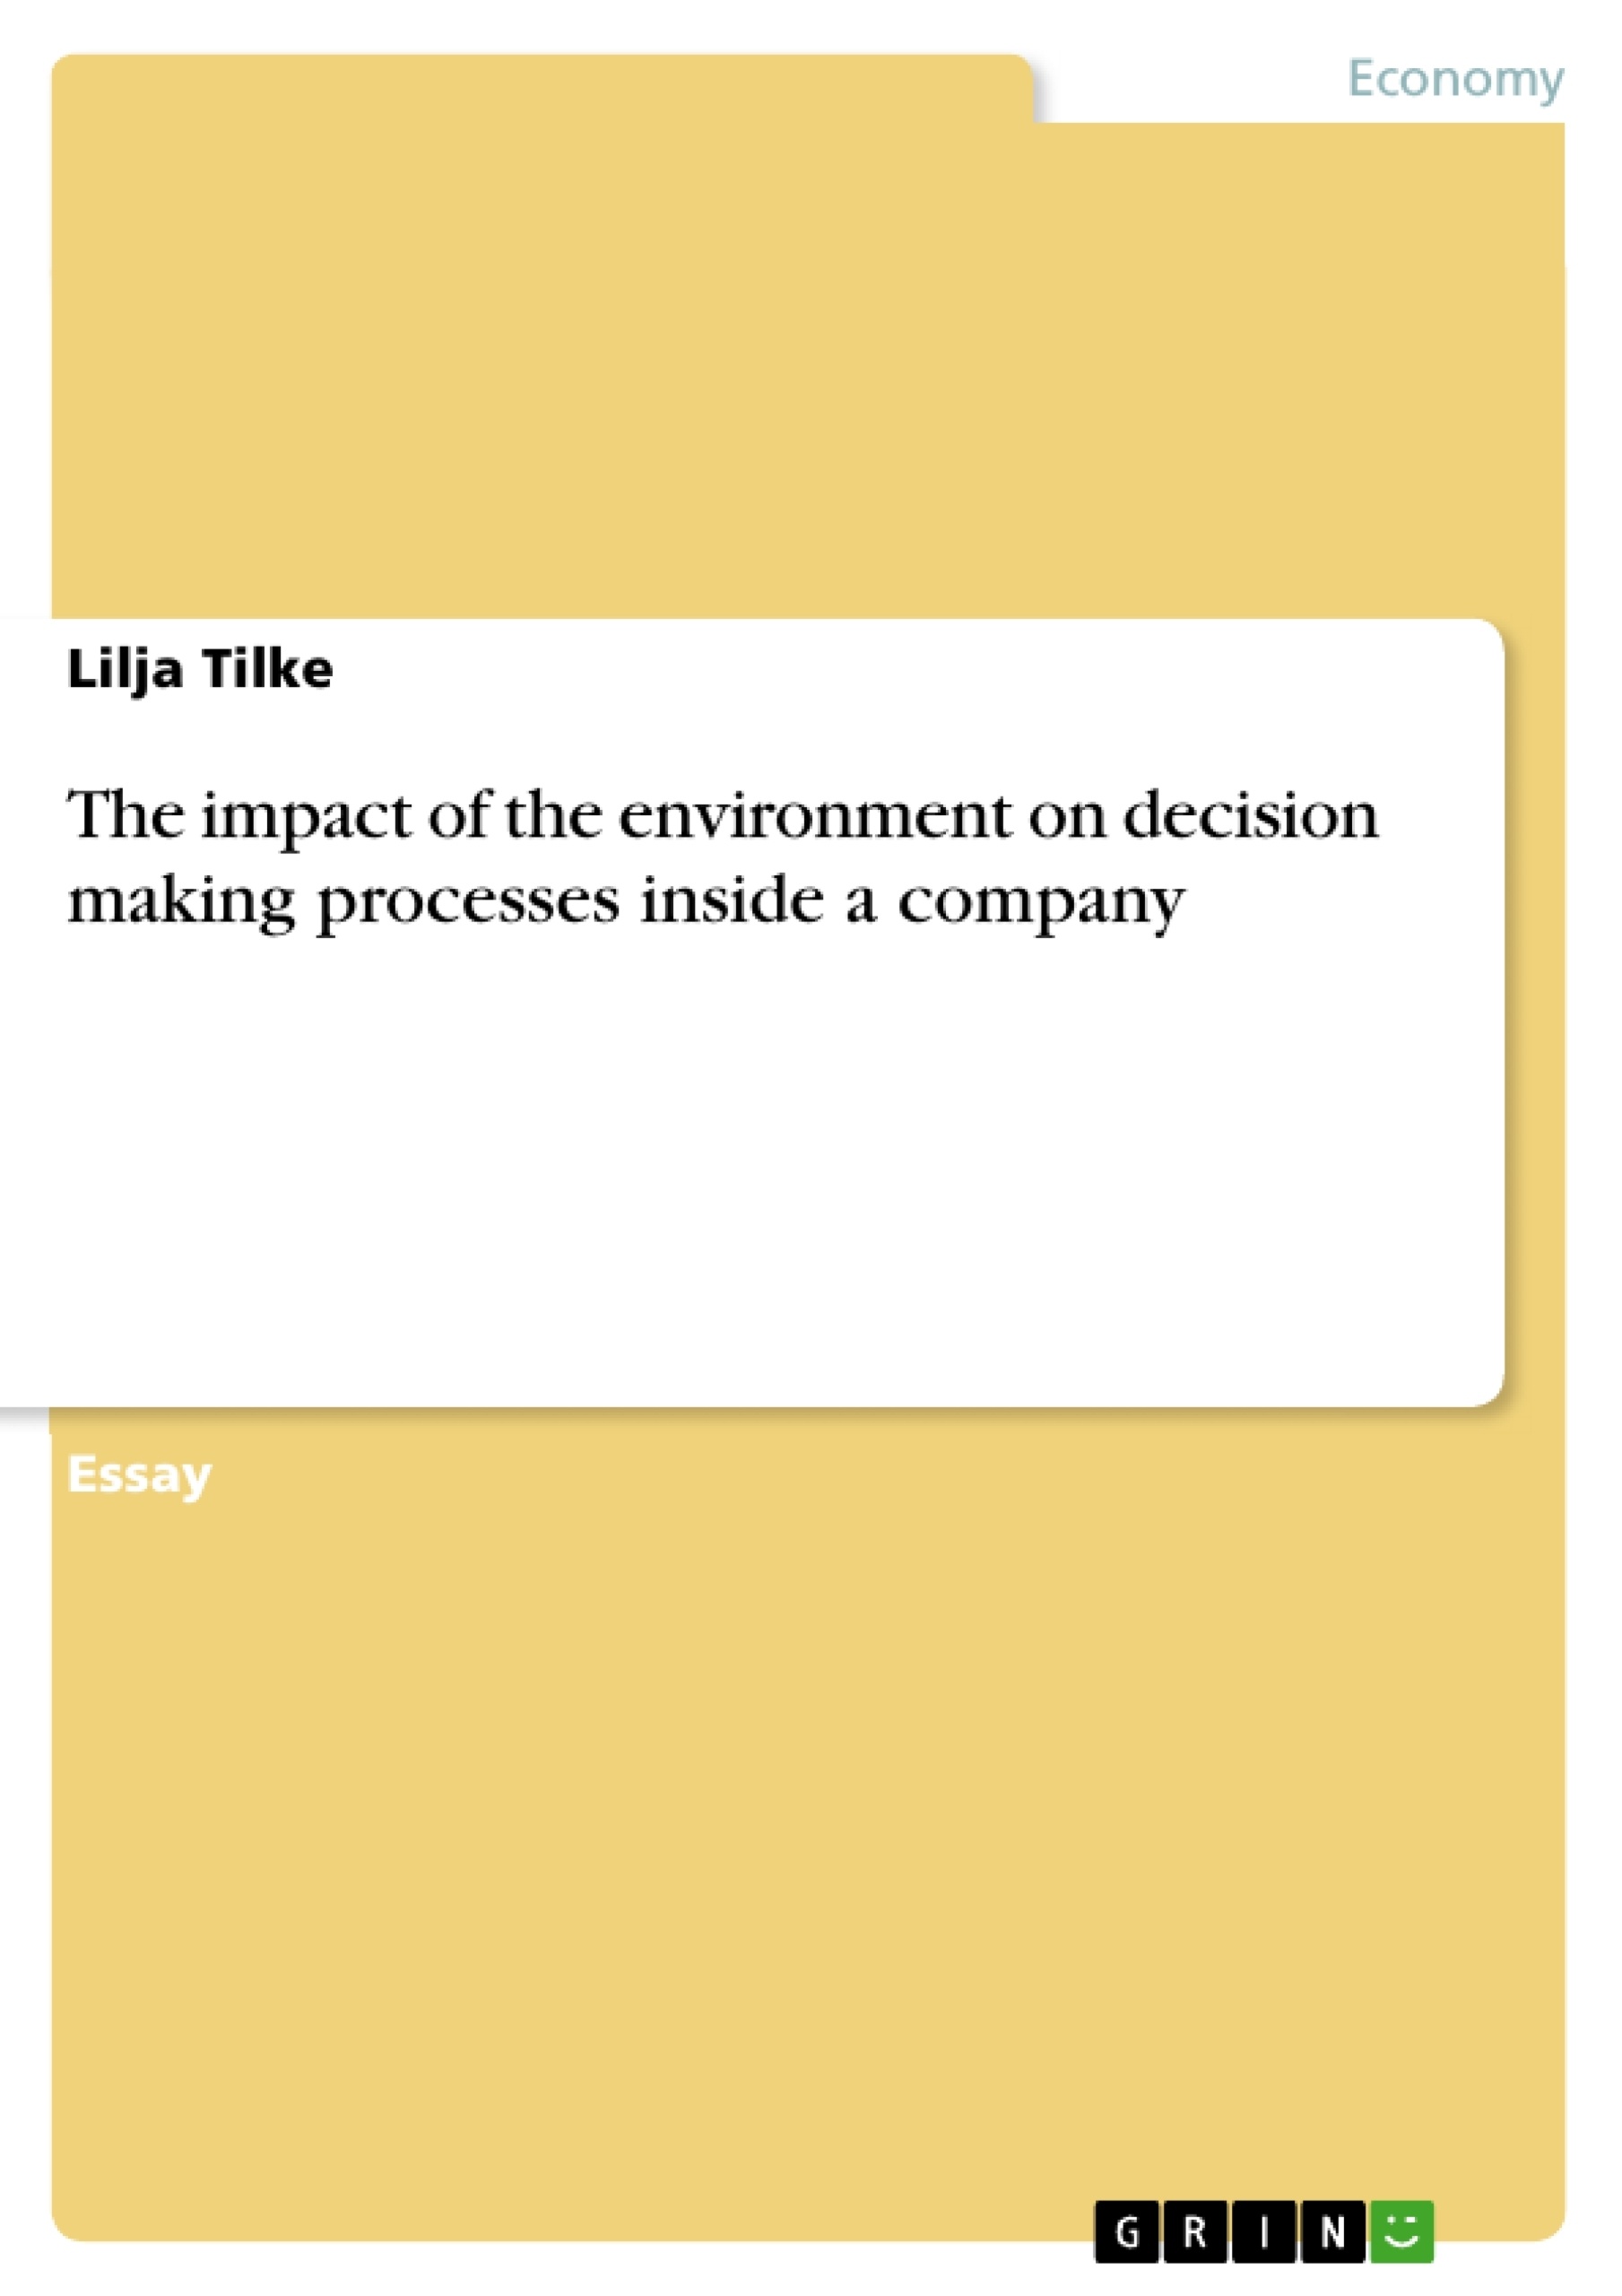 Título: The impact of the environment on decision making processes inside a company